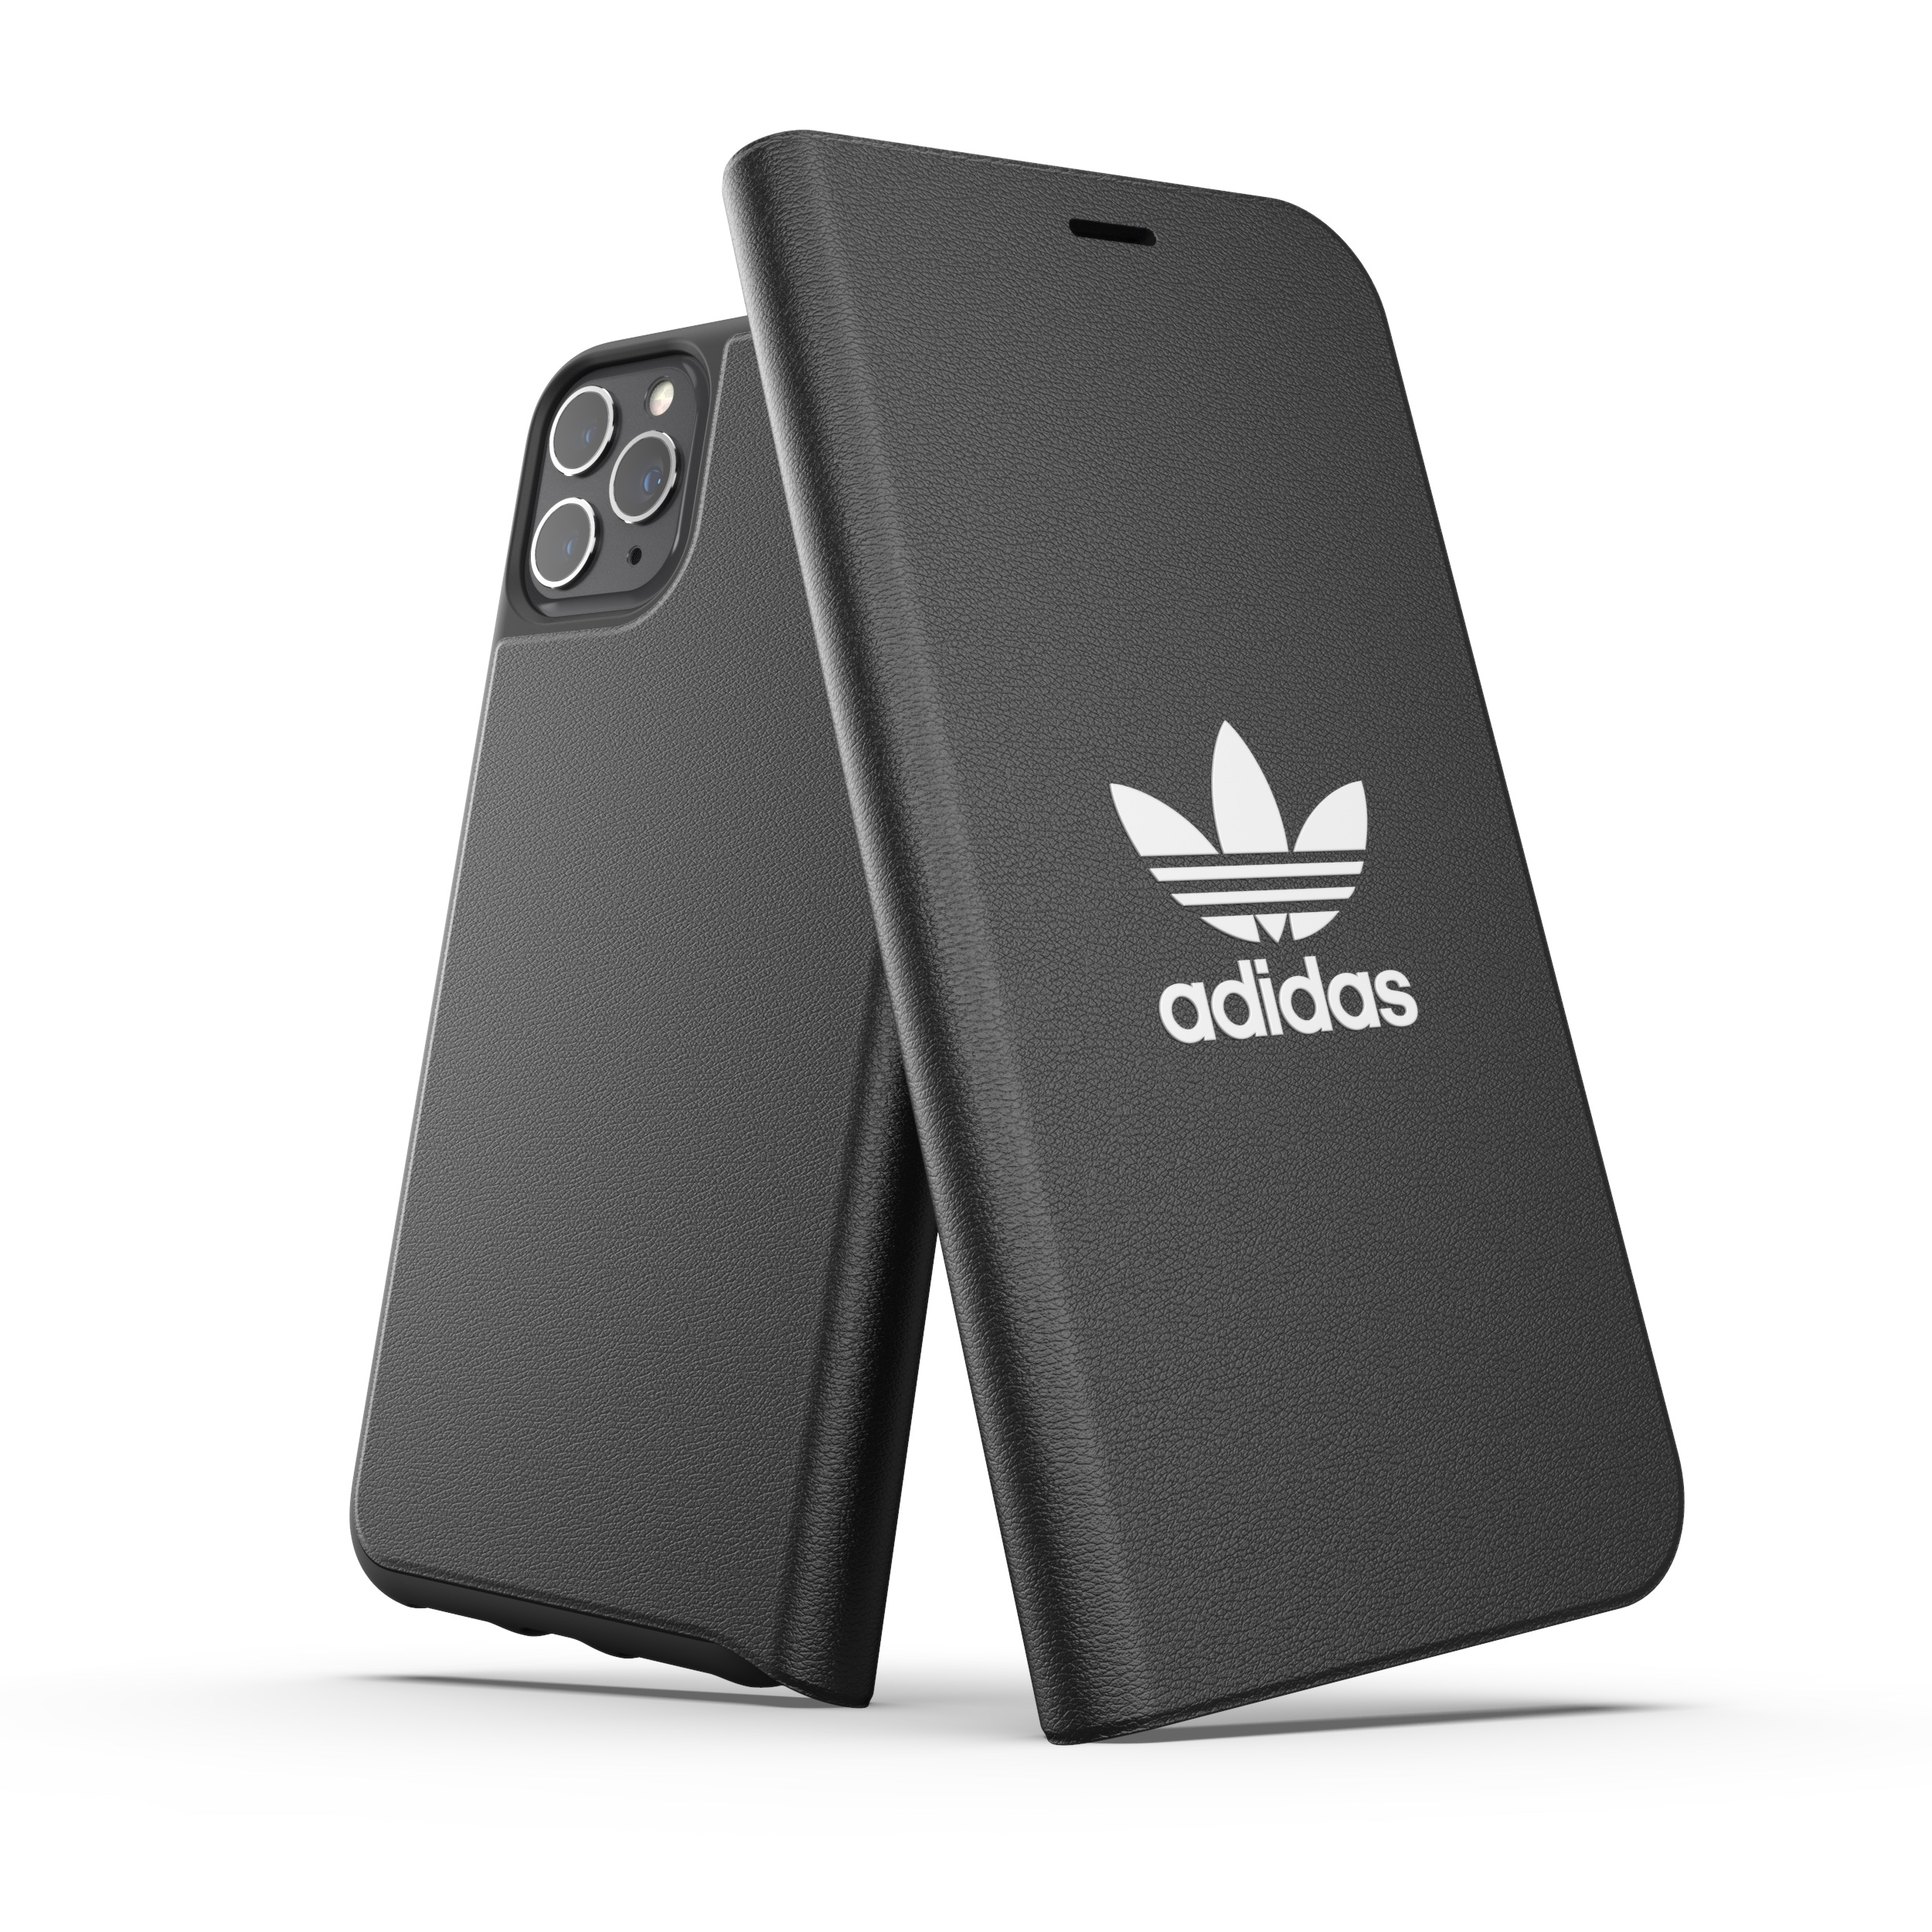 ADIDAS Booklet Case APPLE, IPHONE BASIC, BLACK Bookcover, PRO 11 MAX